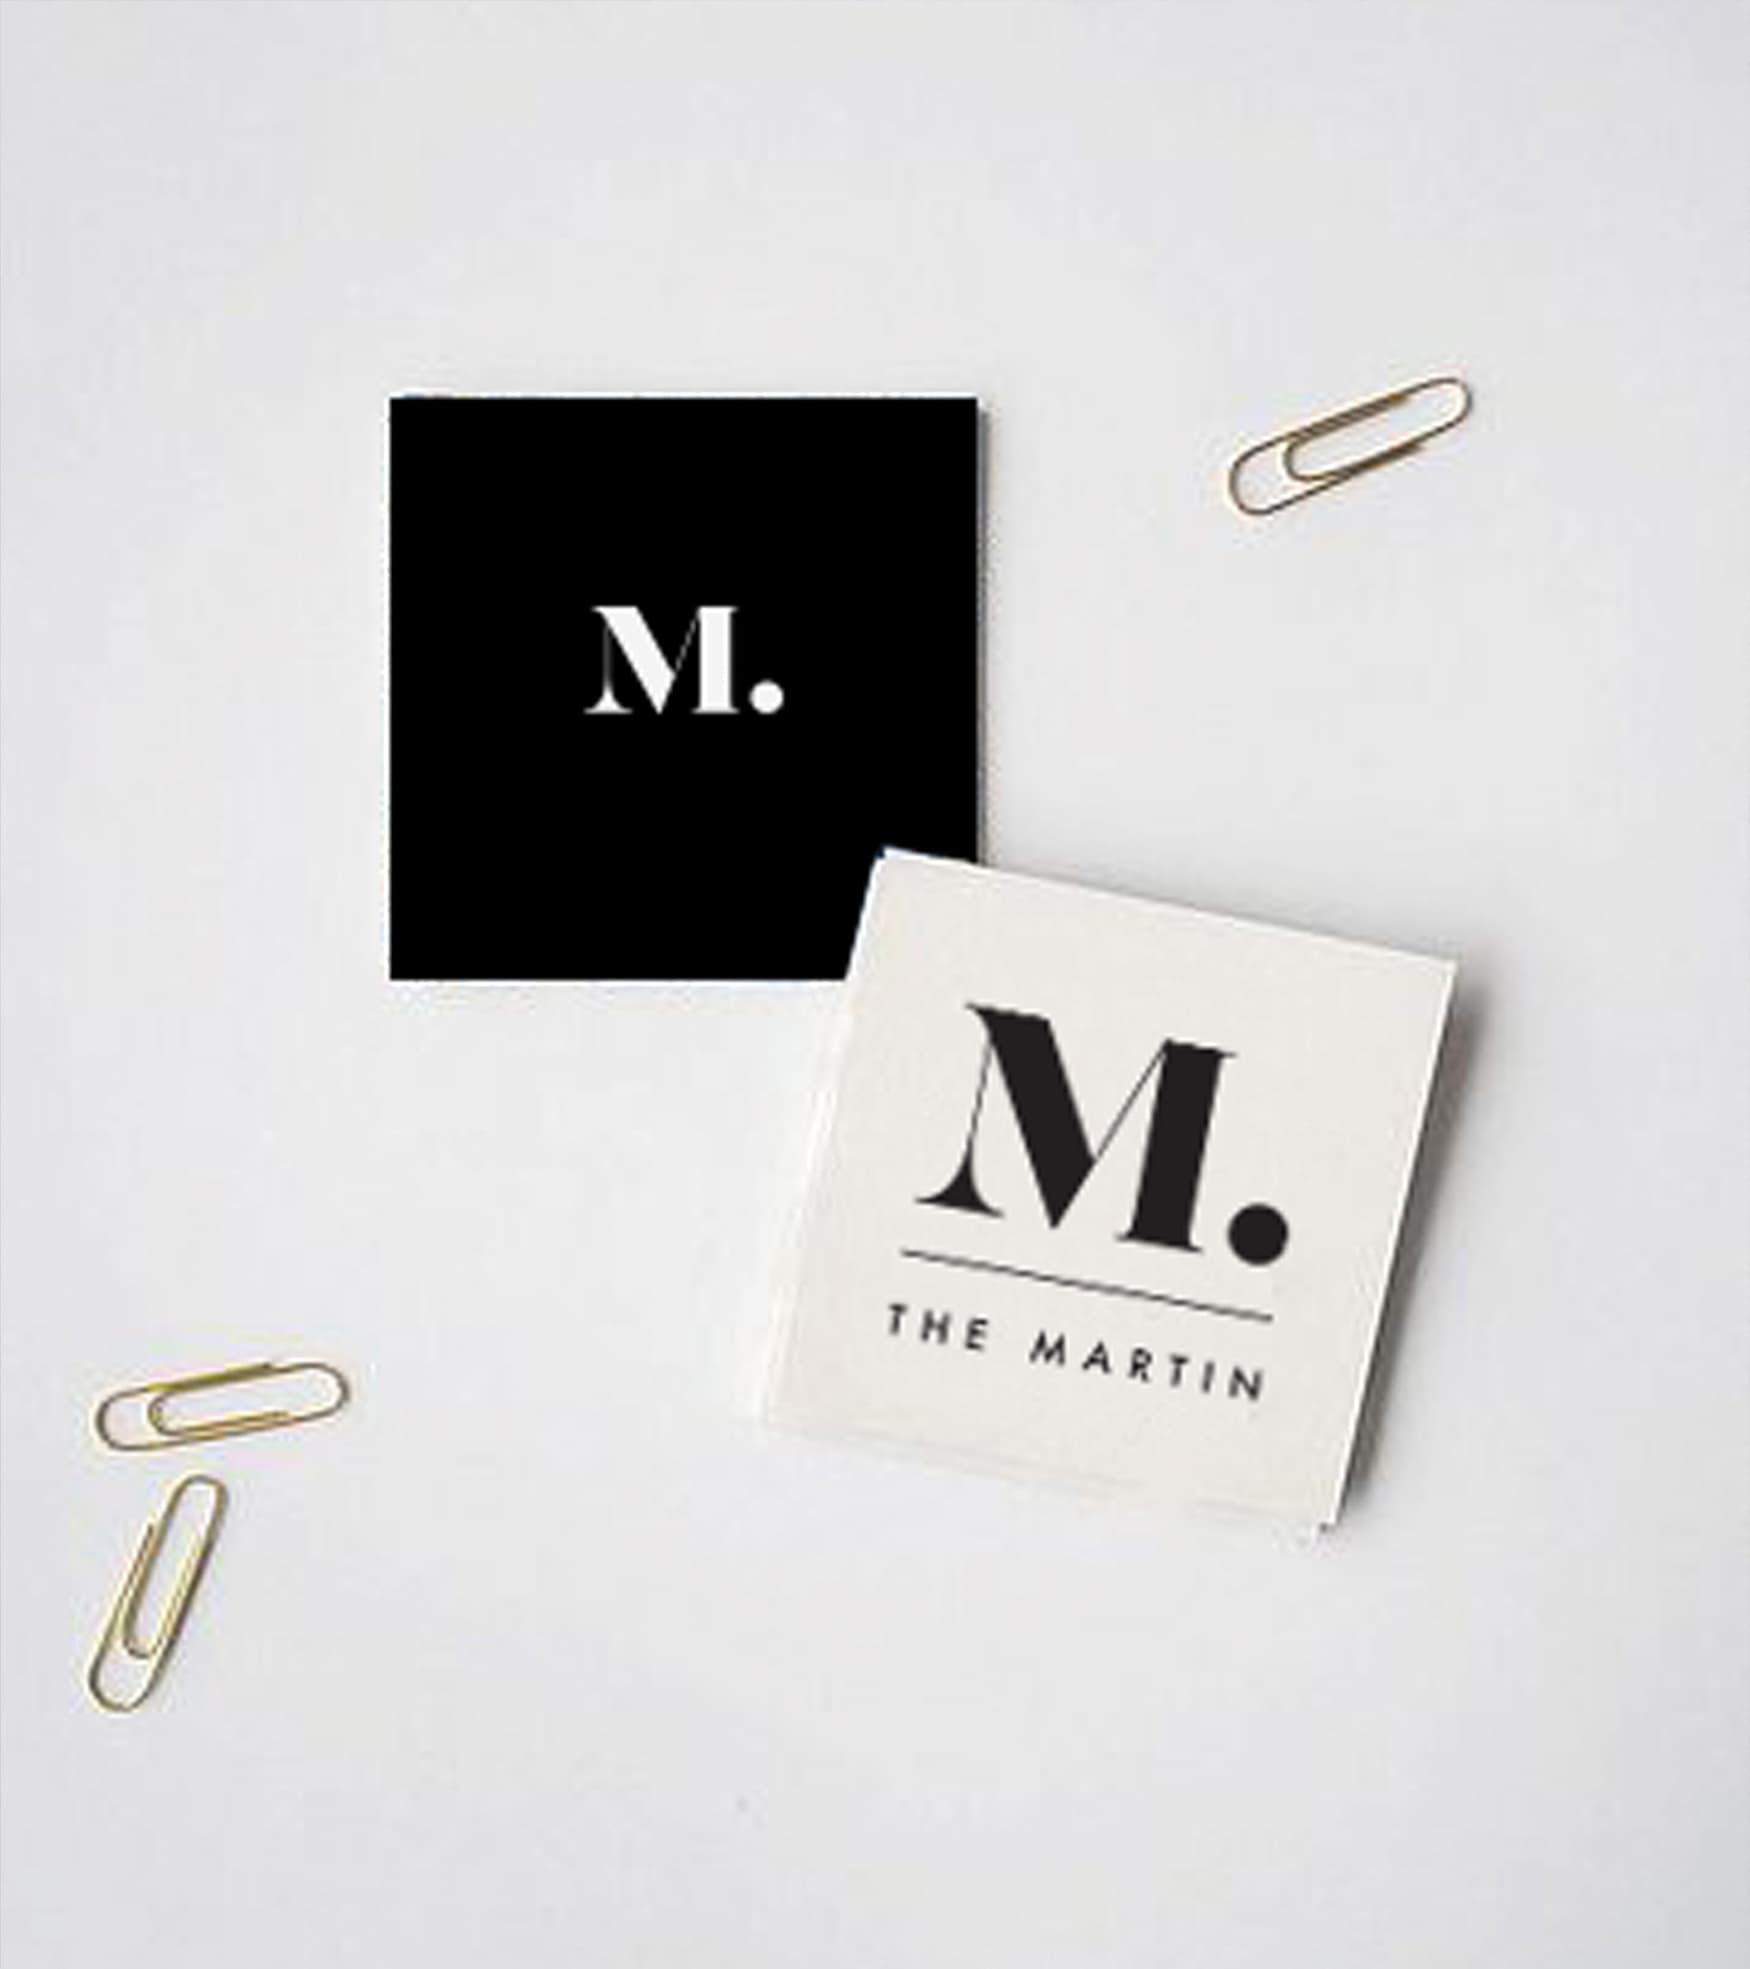 The Martin, San Francisco, Multi-Family Residential and Hospitality Branding